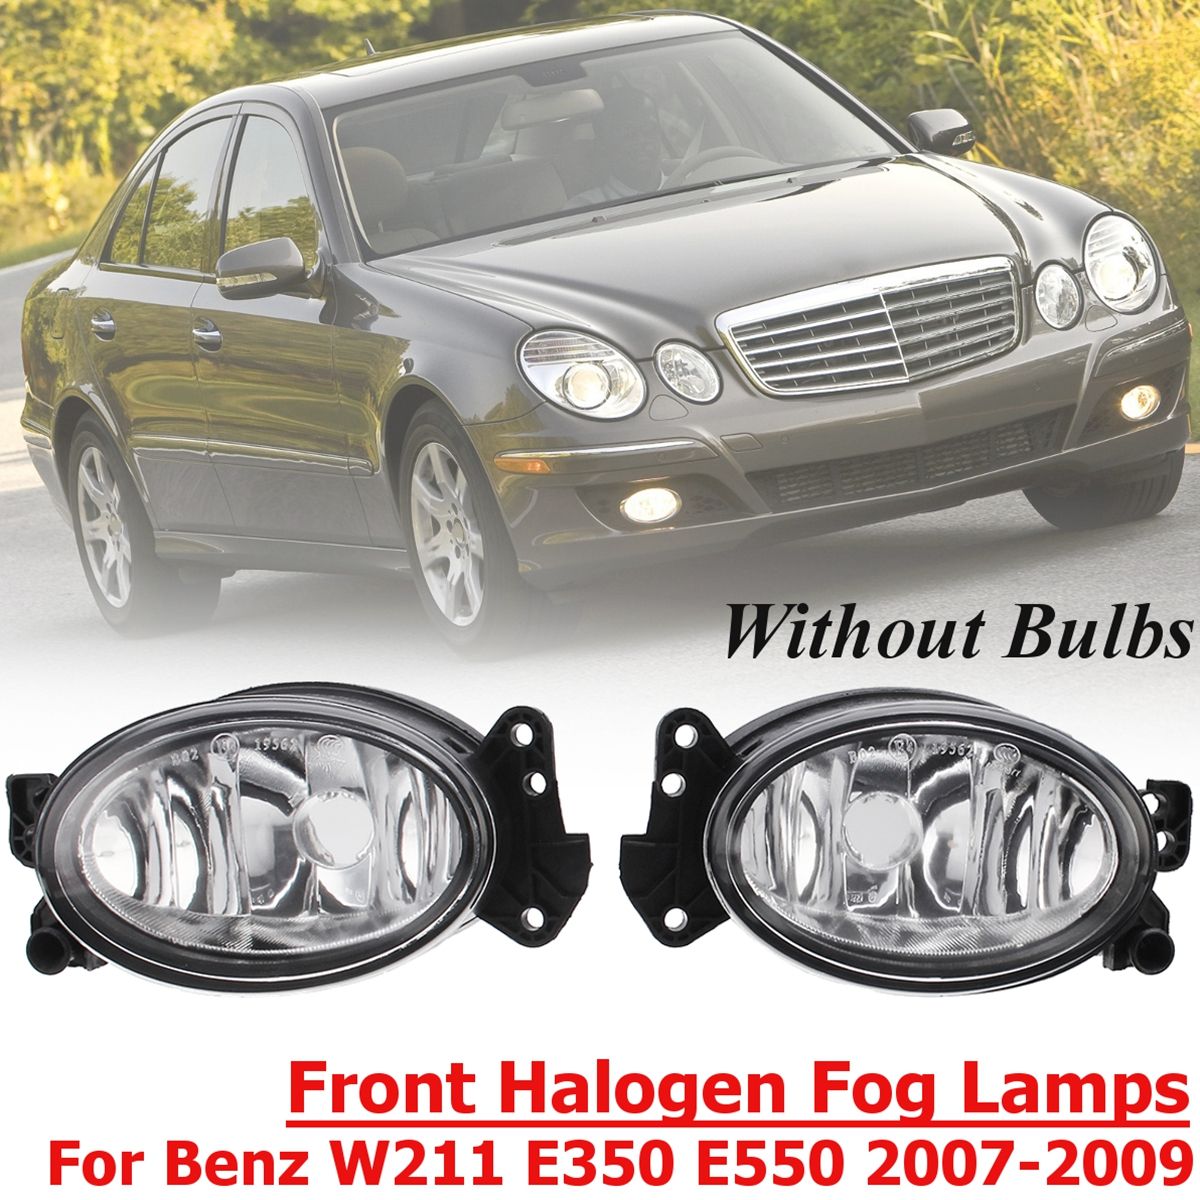 Car-Front-Bumper-Halogen-Fog-Lights-with-No-Bulbs-Pair-for-Benz-W211-W204-W219-W164-1698201556-16982-1525332